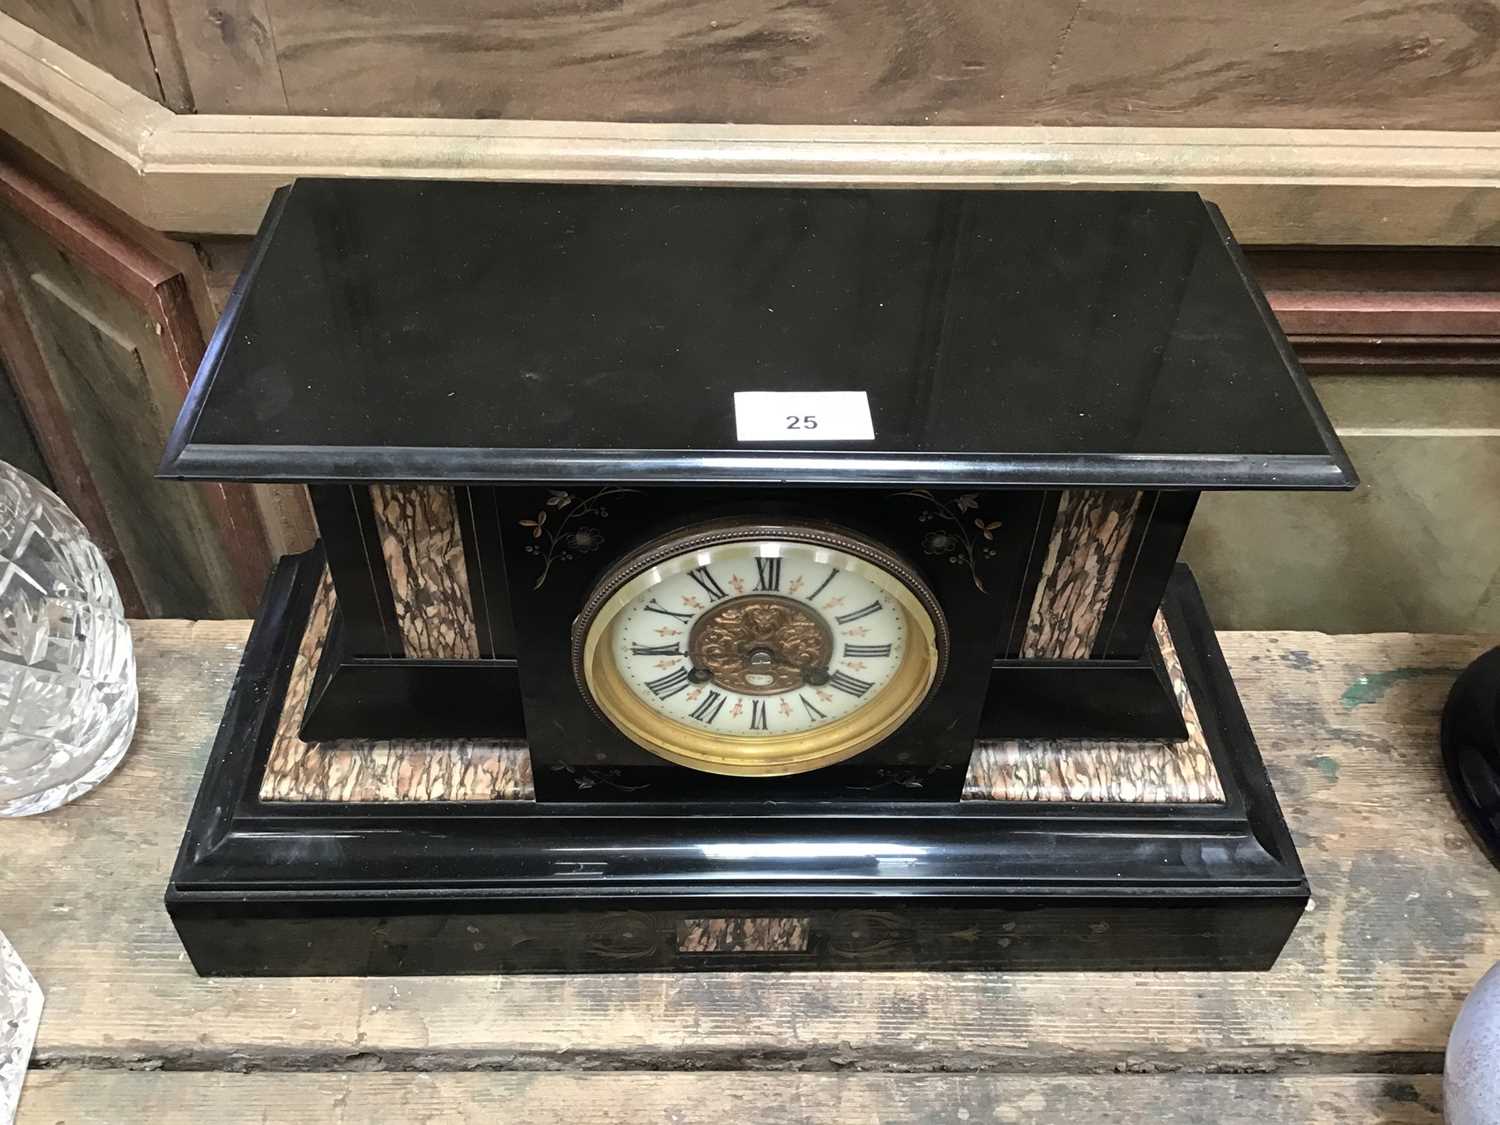 Lot 25 - 19th century slate and marble mantle clock with inlaid decoration